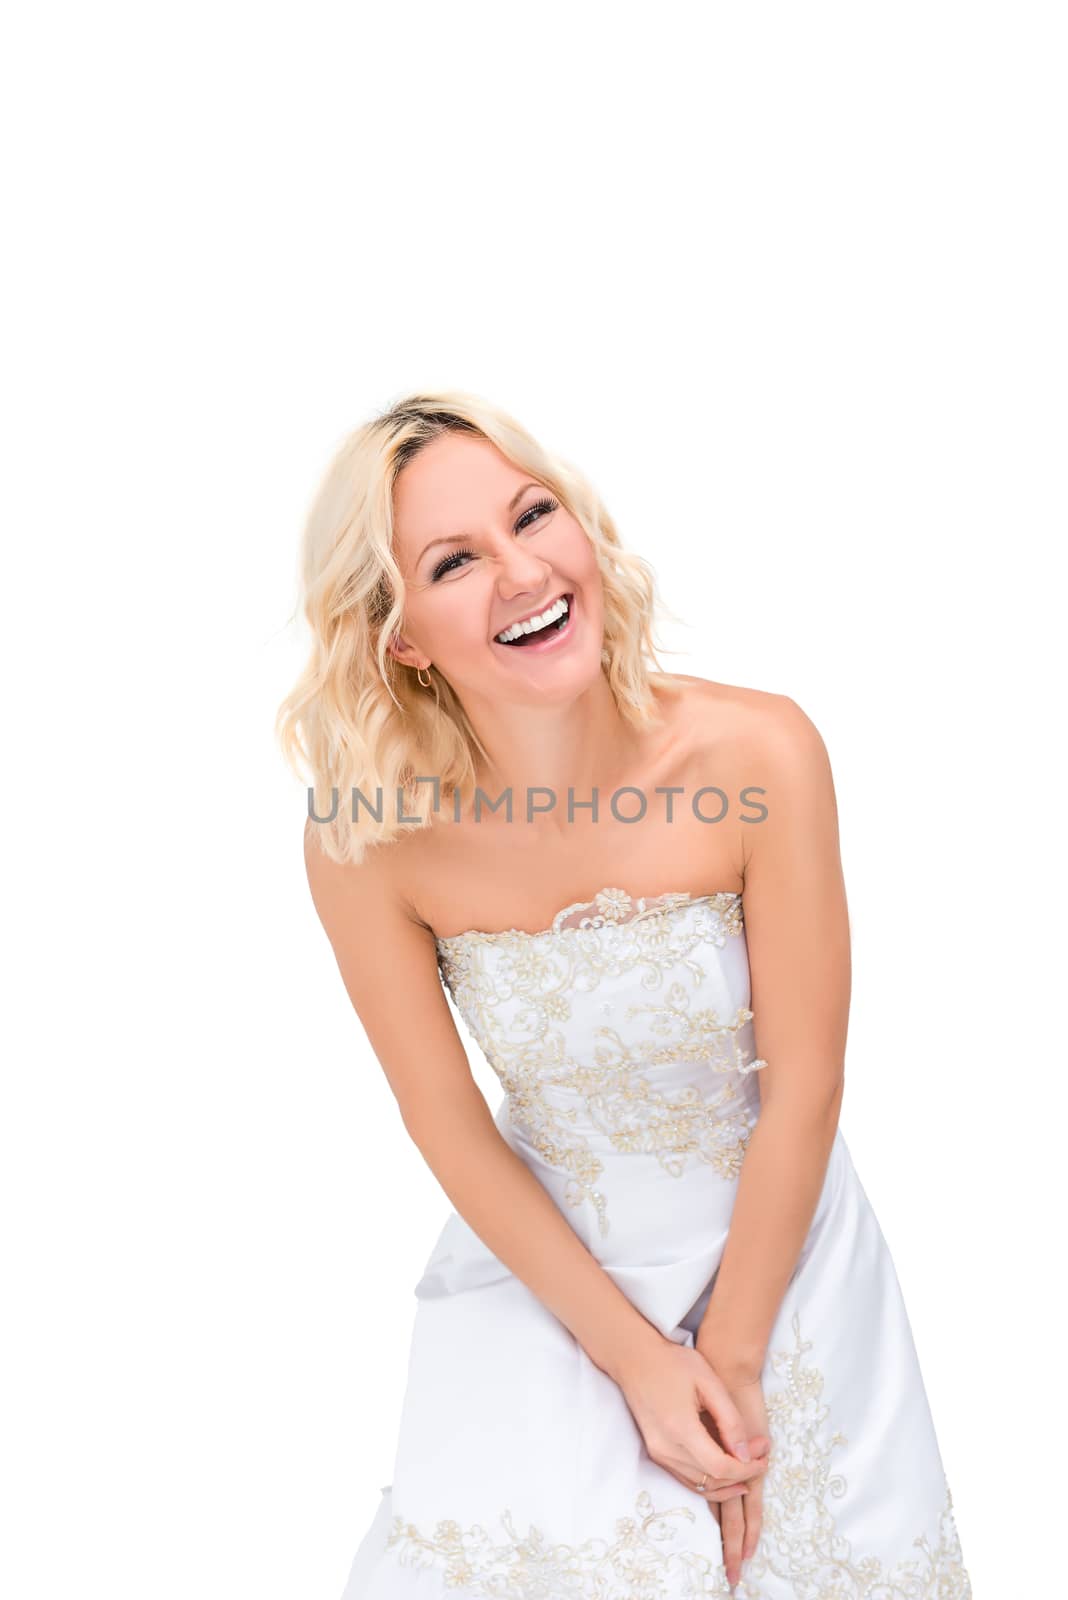 girl with a beautiful smile isolated on white background